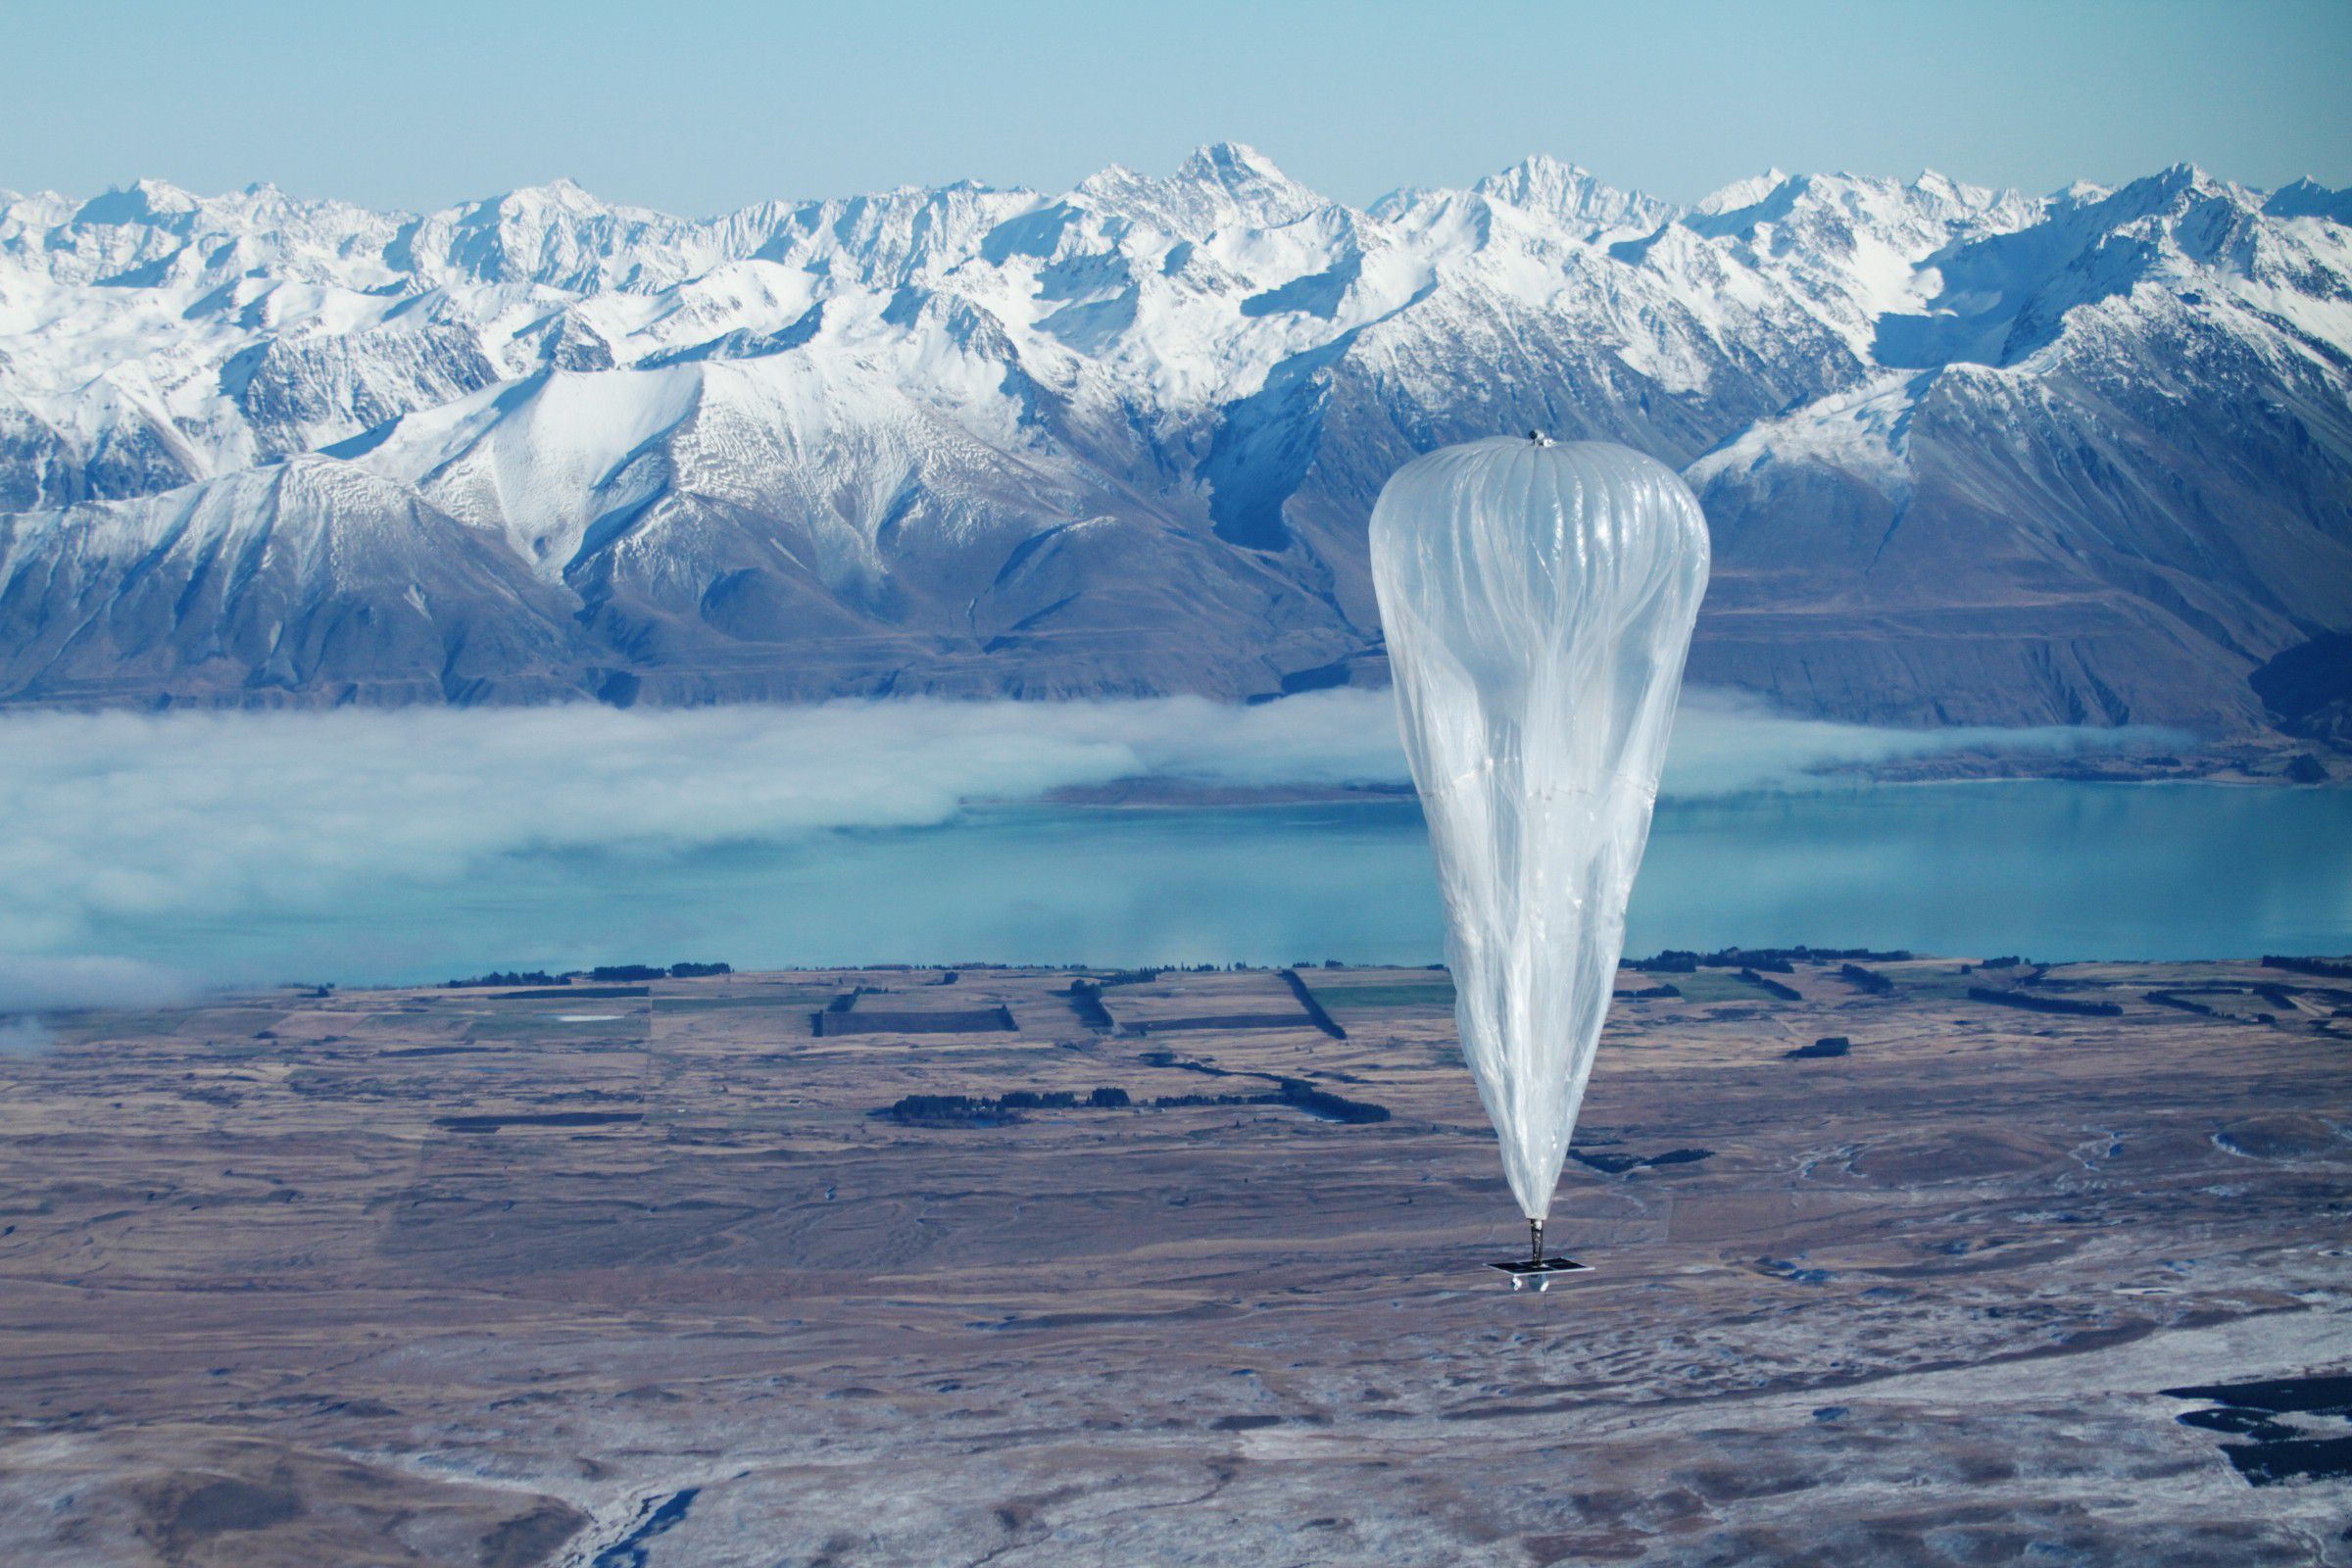 Image of a balloon floating in front of a snow-covered mountain range.